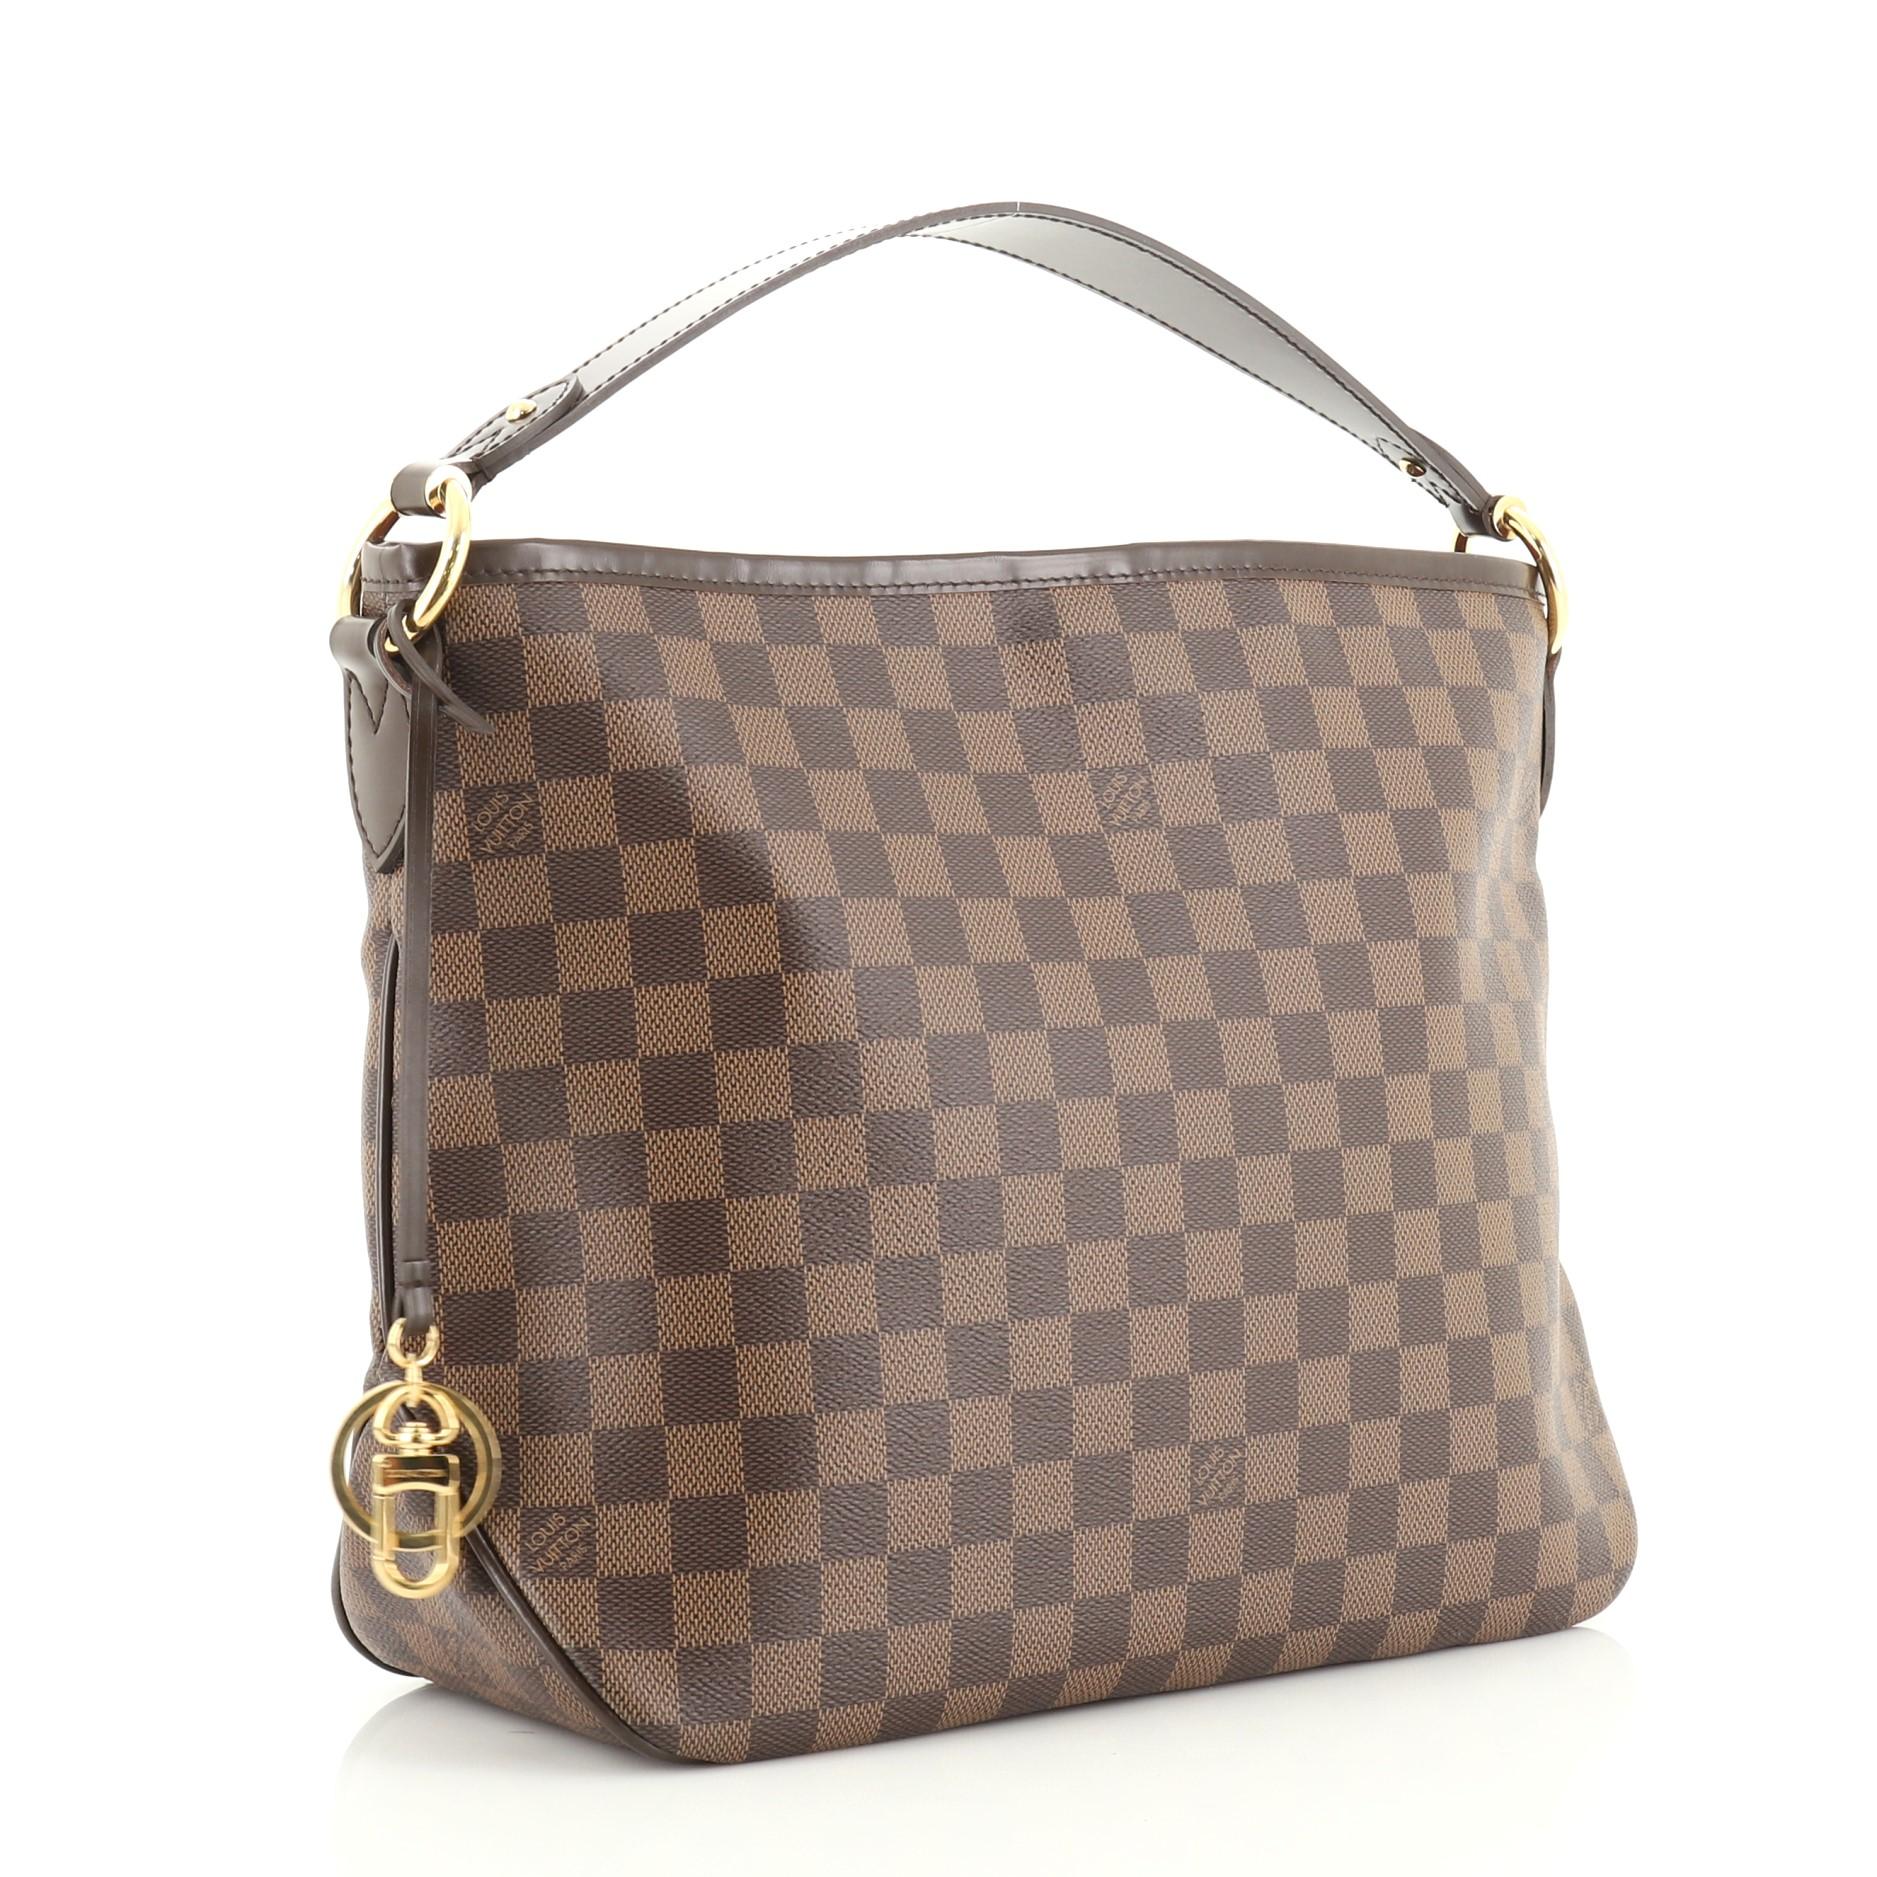 This Louis Vuitton Delightful NM Handbag Damier MM is an everyday bag with the brand's traditional design with modern flair. Crafted in damier ebene coated canvas, it features a flat leather handle and gold-tone hardware. Its hook closure opens to a